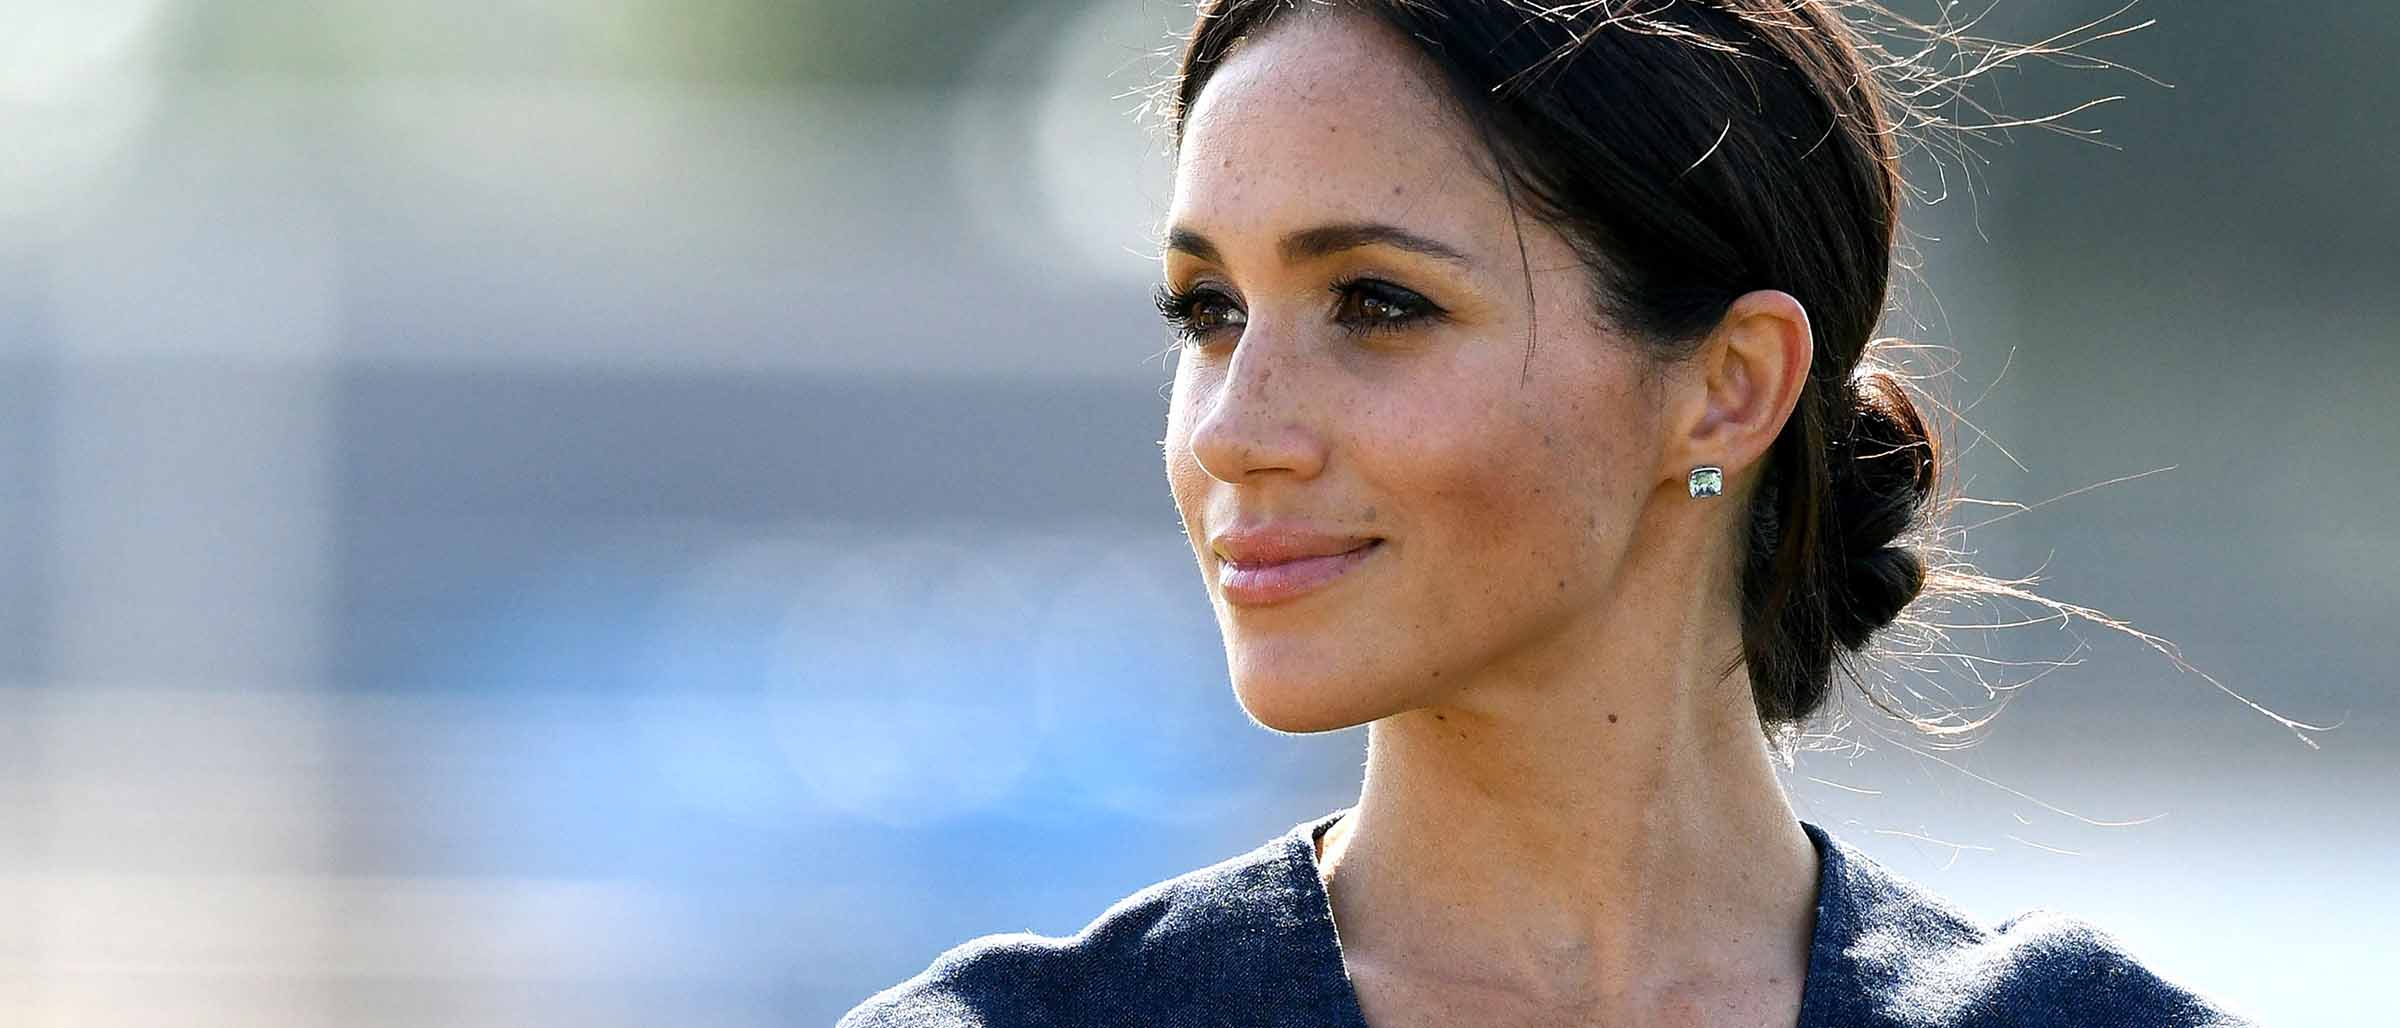 How rich is Meghan Markle? Her net worth could really surprise you